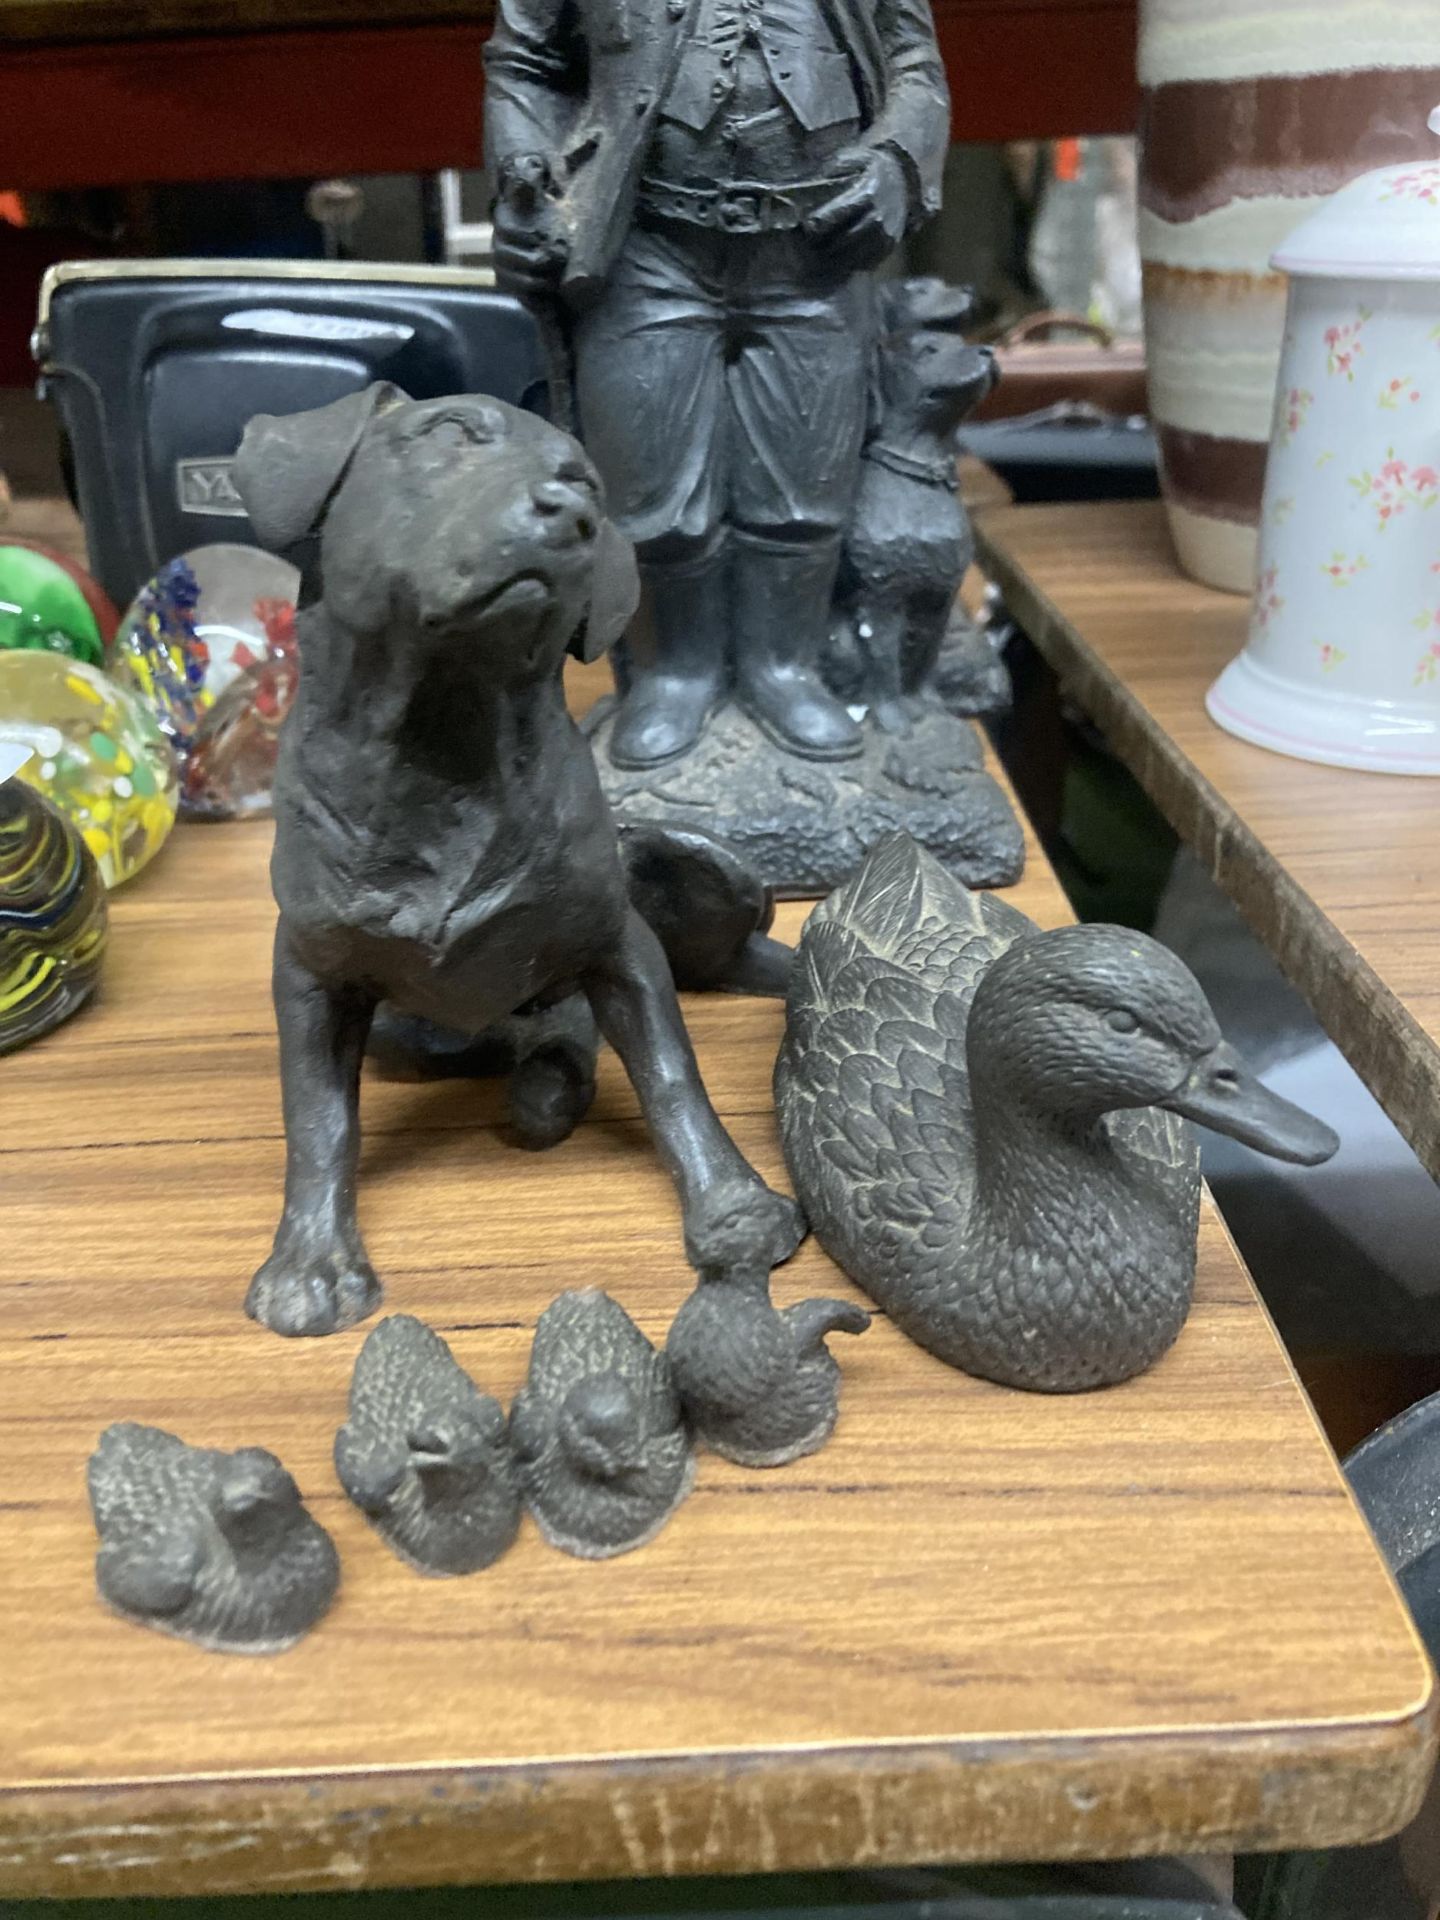 THREE PLASTER COAL GAMEKEEPER FIGURES TOGETHER WITH DOG FIGURE AND DUCKS - Image 2 of 3